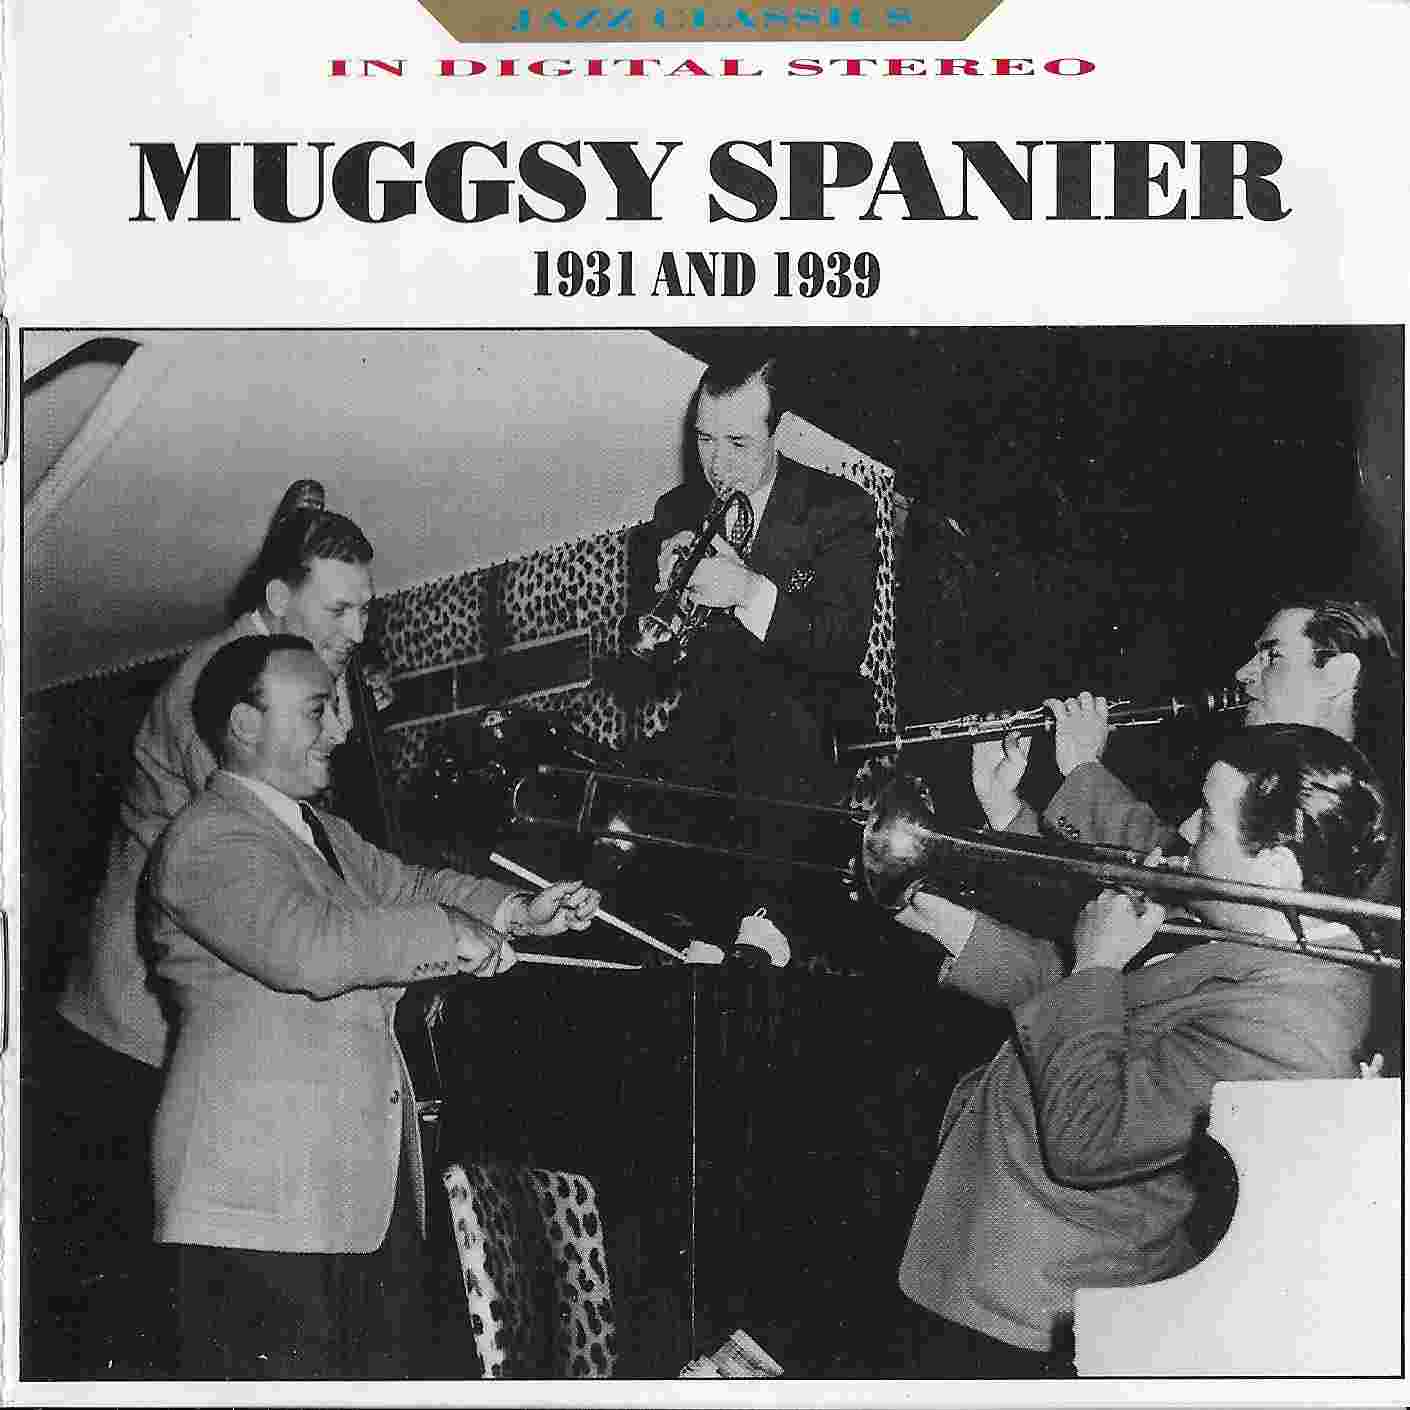 Picture of Jazz classics - Muggsy Spanier by artist Muggsy Spanier from the BBC cds - Records and Tapes library